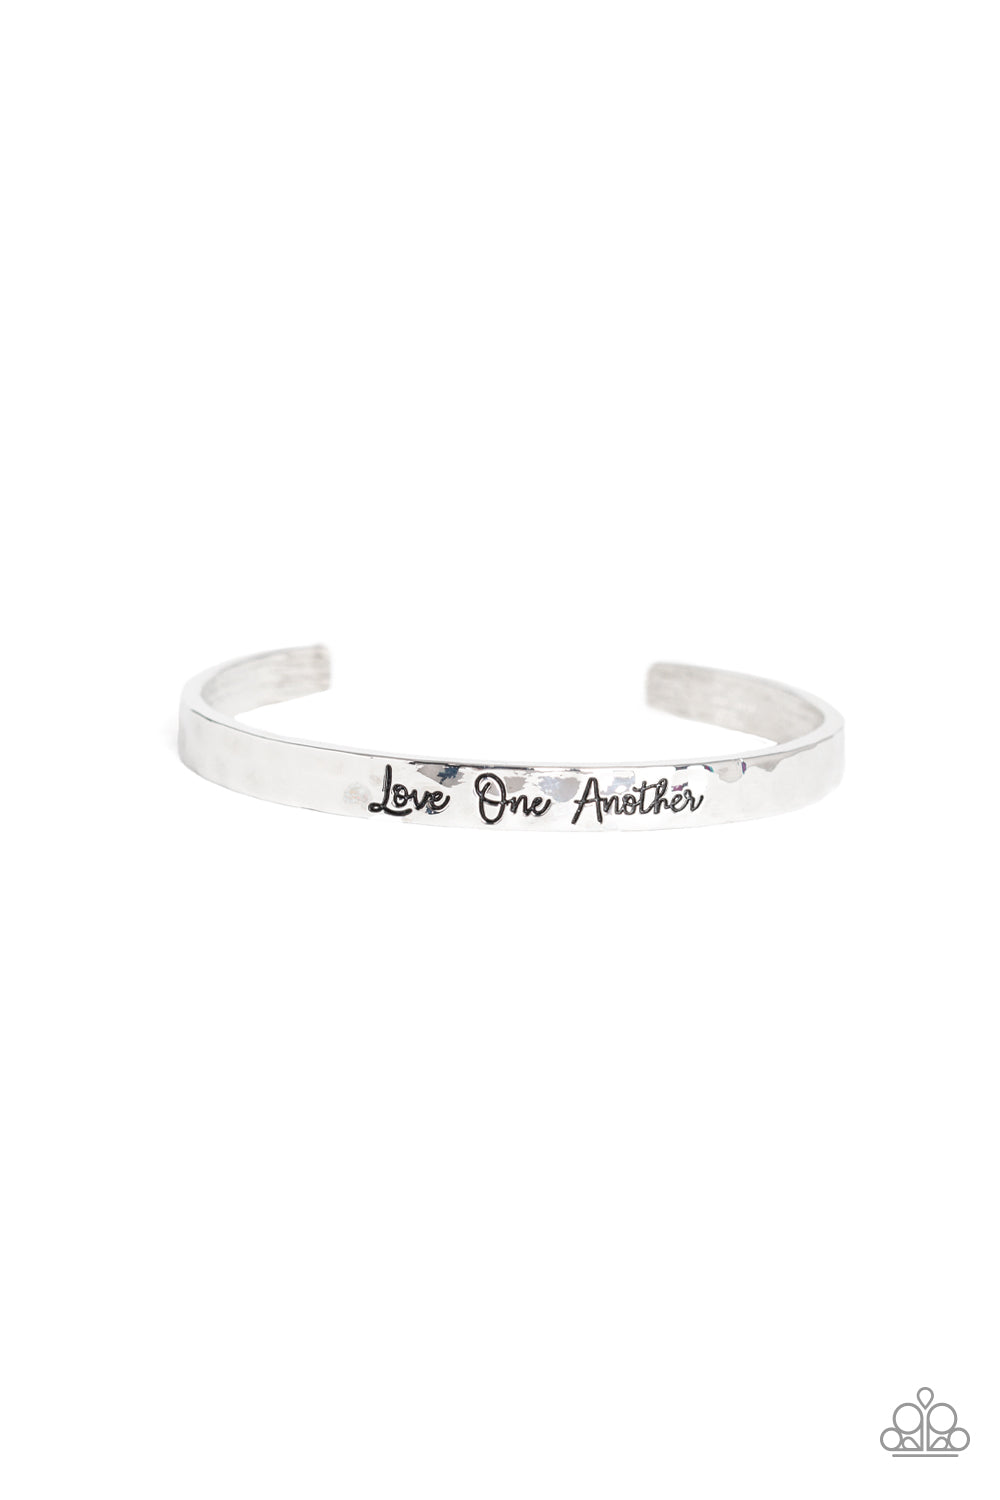 Paparazzi bracelets cuff - Love One Another - Silver